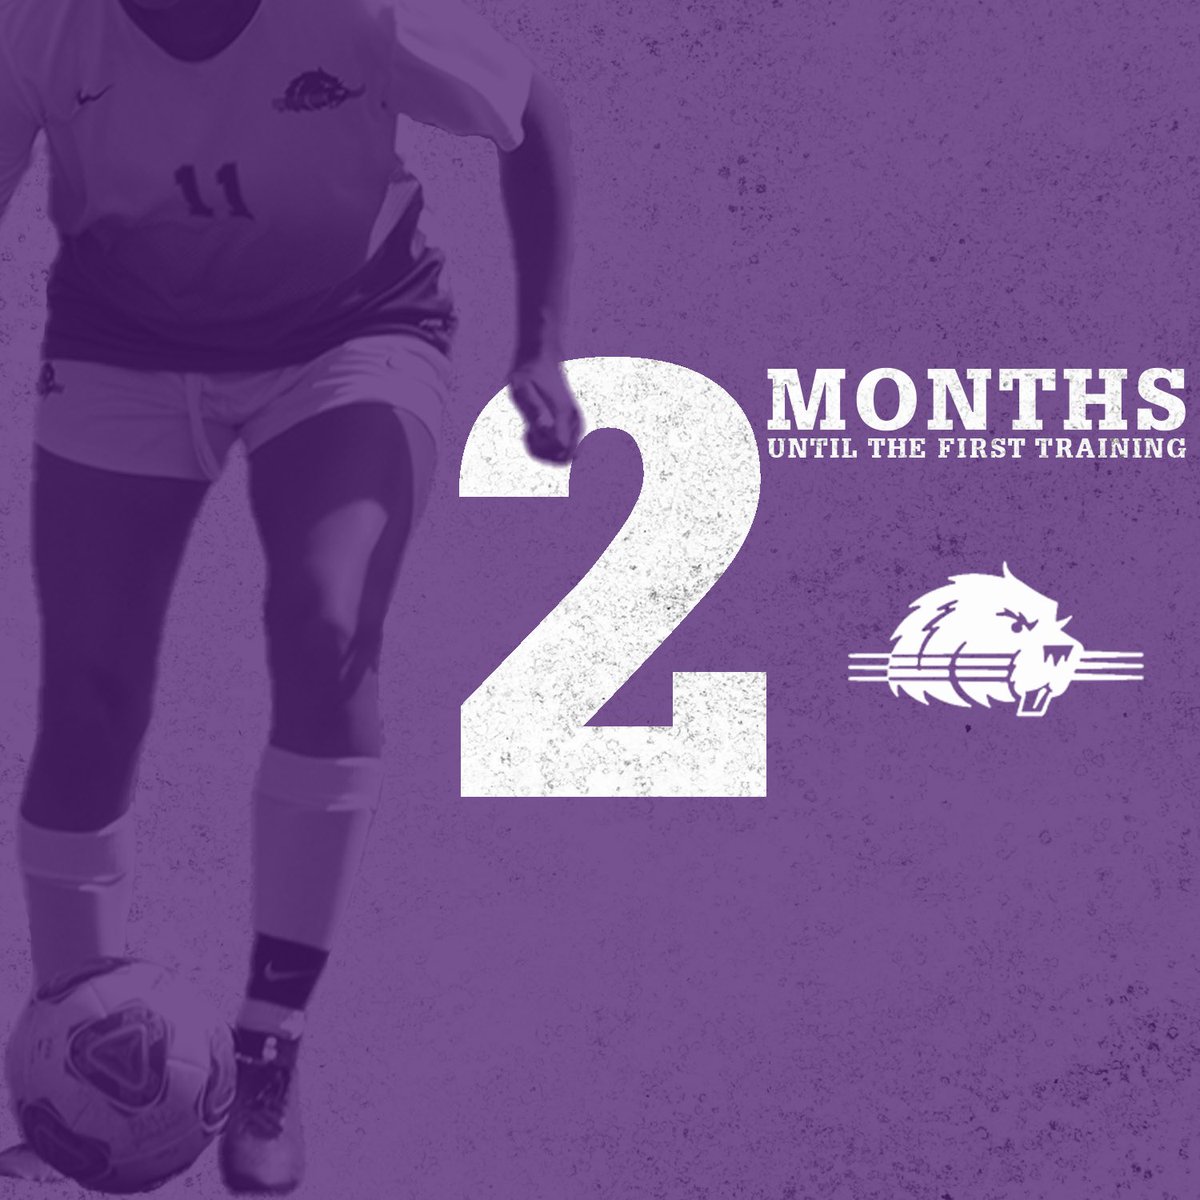 2 months till the first training for 2023!
#RollBeavs #Believe #Compete